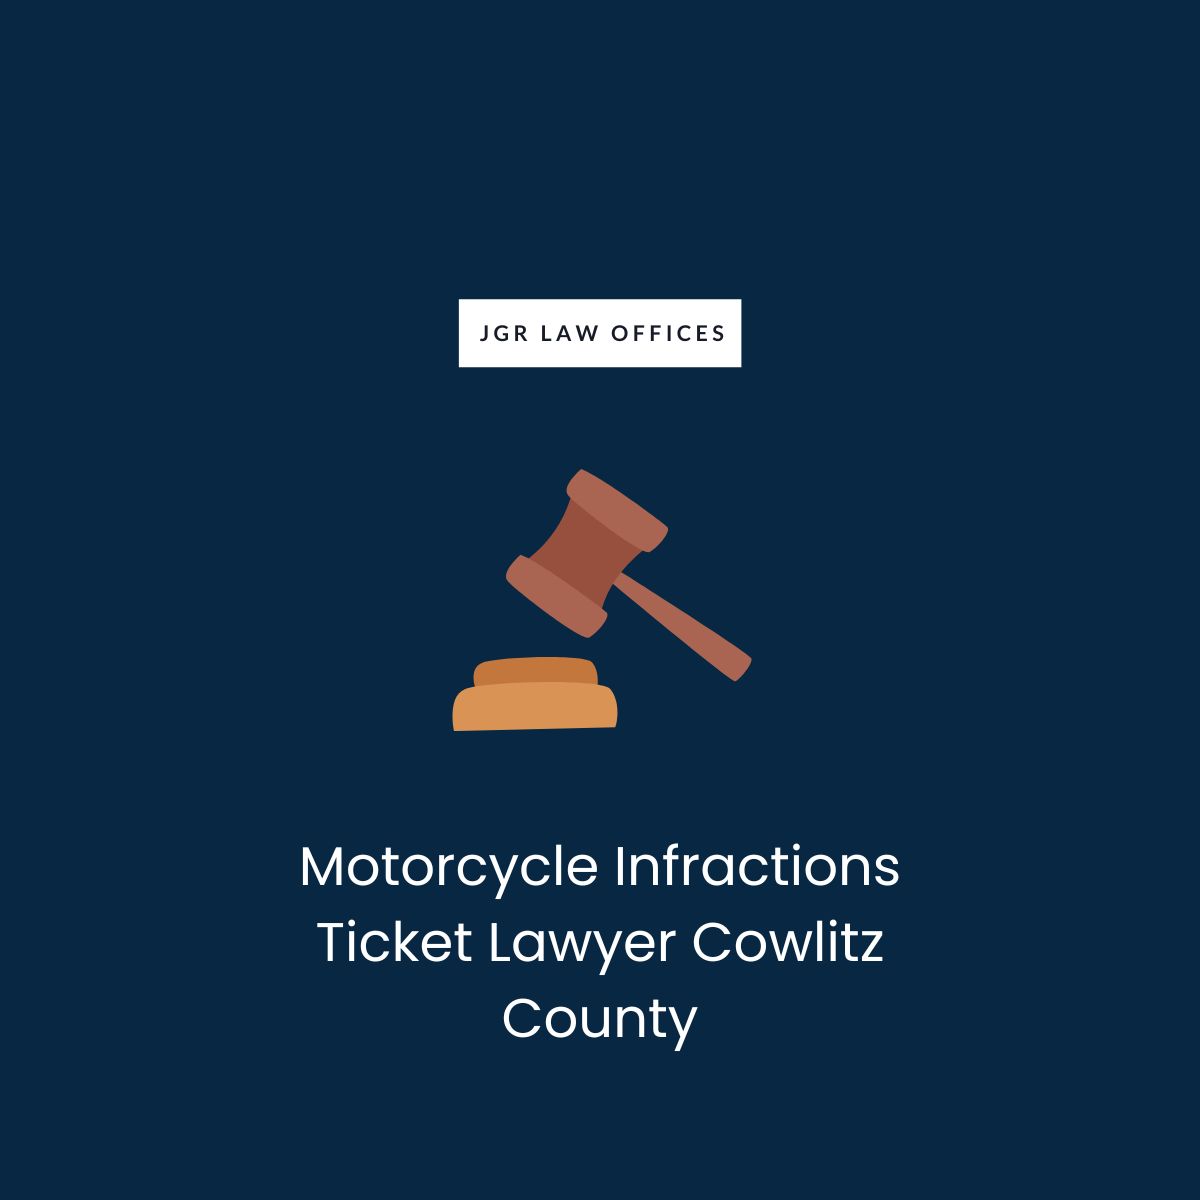 Motorcycle Infractions Ticket Attorney Cowlitz County